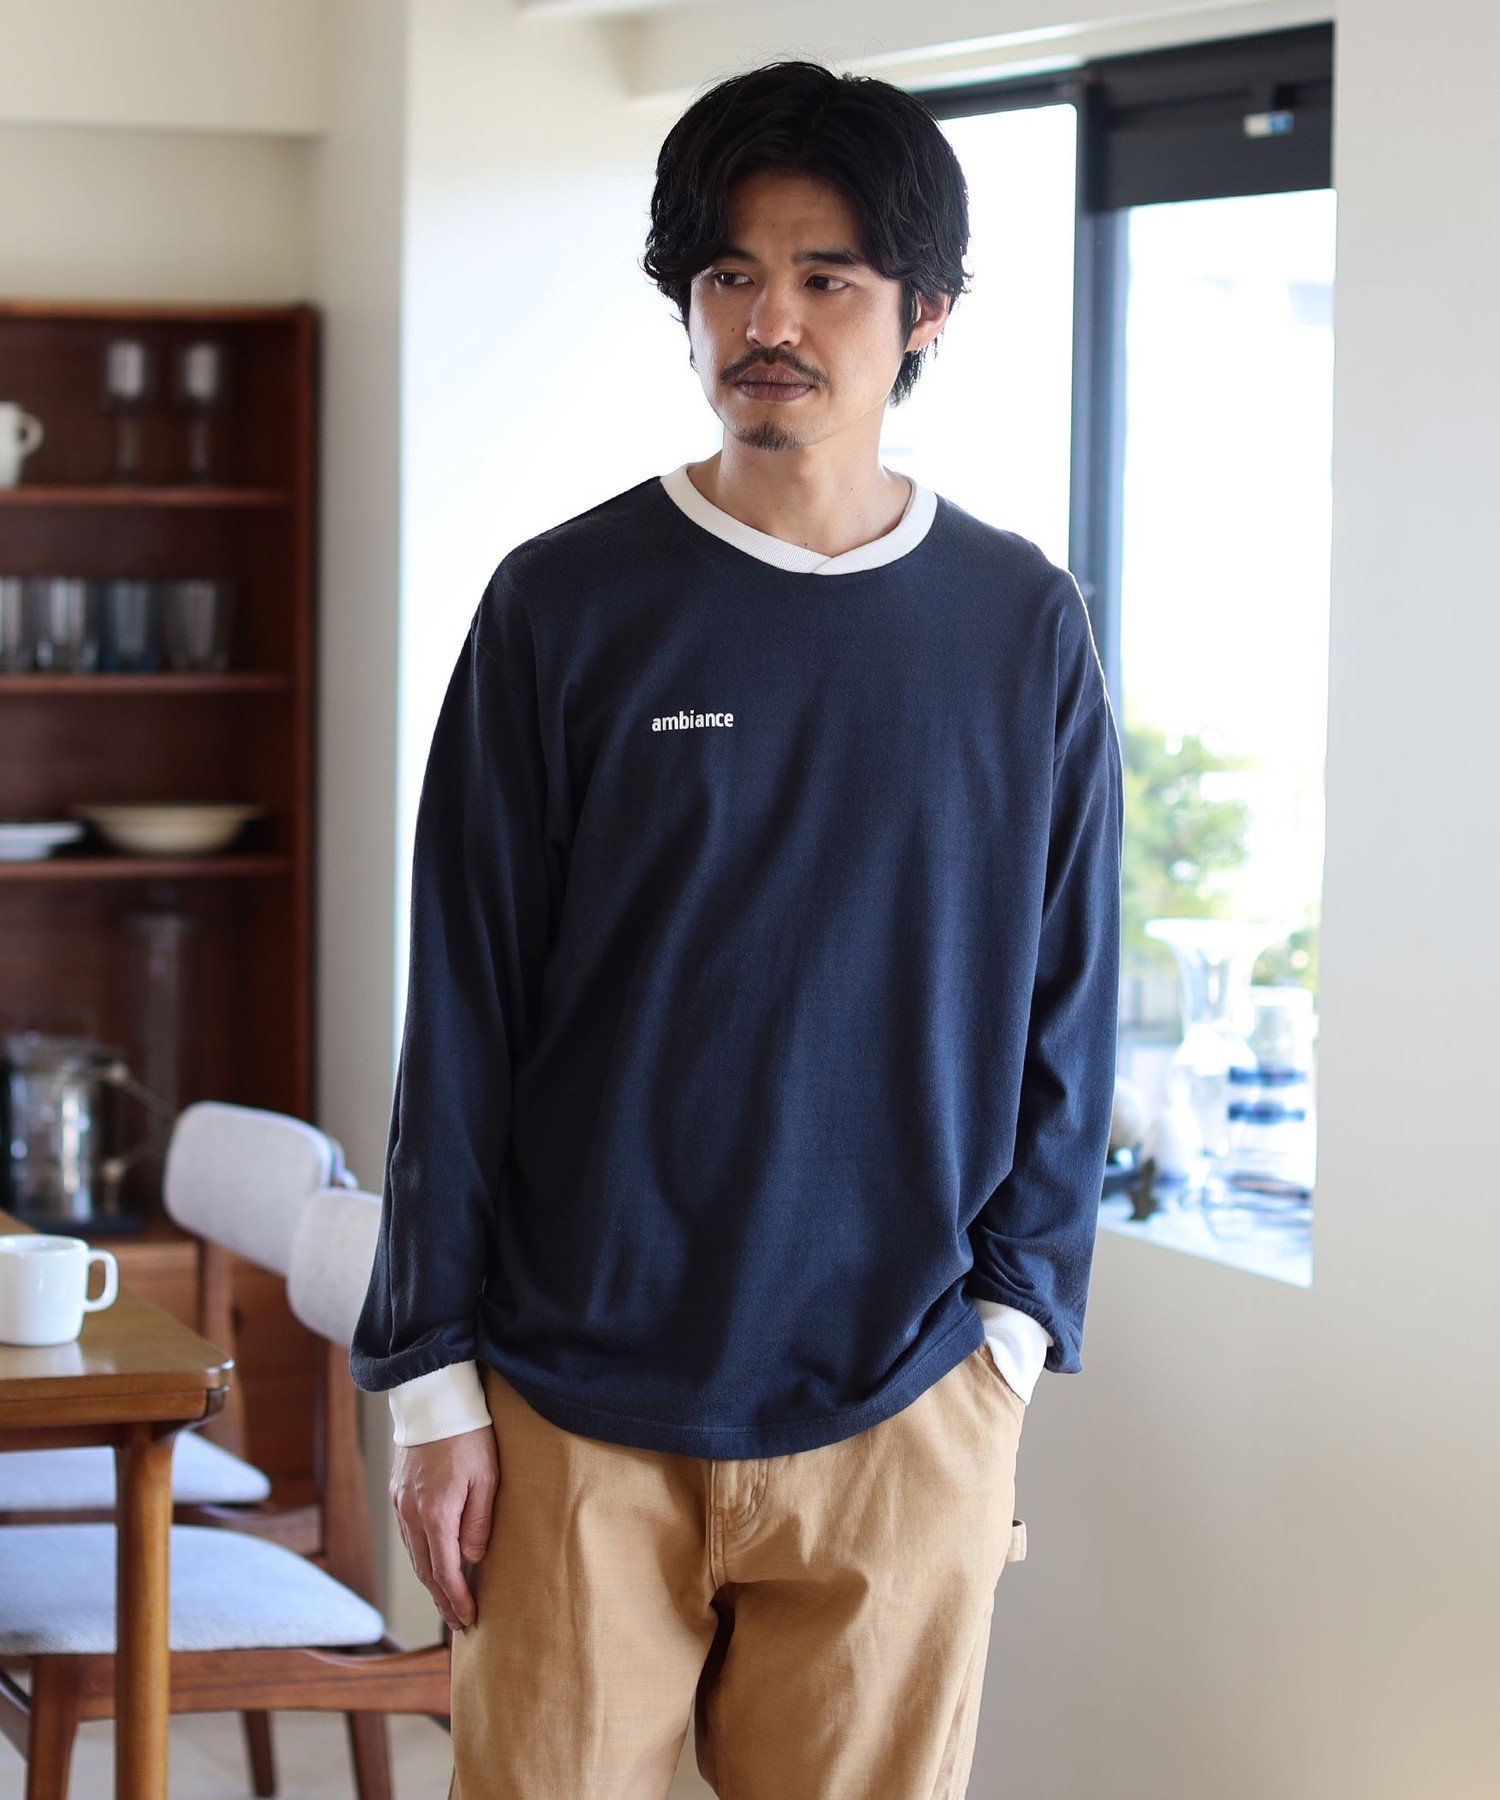 【SALE／30 OFF】B:MING by BEAMS ambiance / Game Shirts Long Sleeve ビーミング ライフストア バイ ビームス トップス カットソー Tシャツ ネイビー レッド【送料無料】